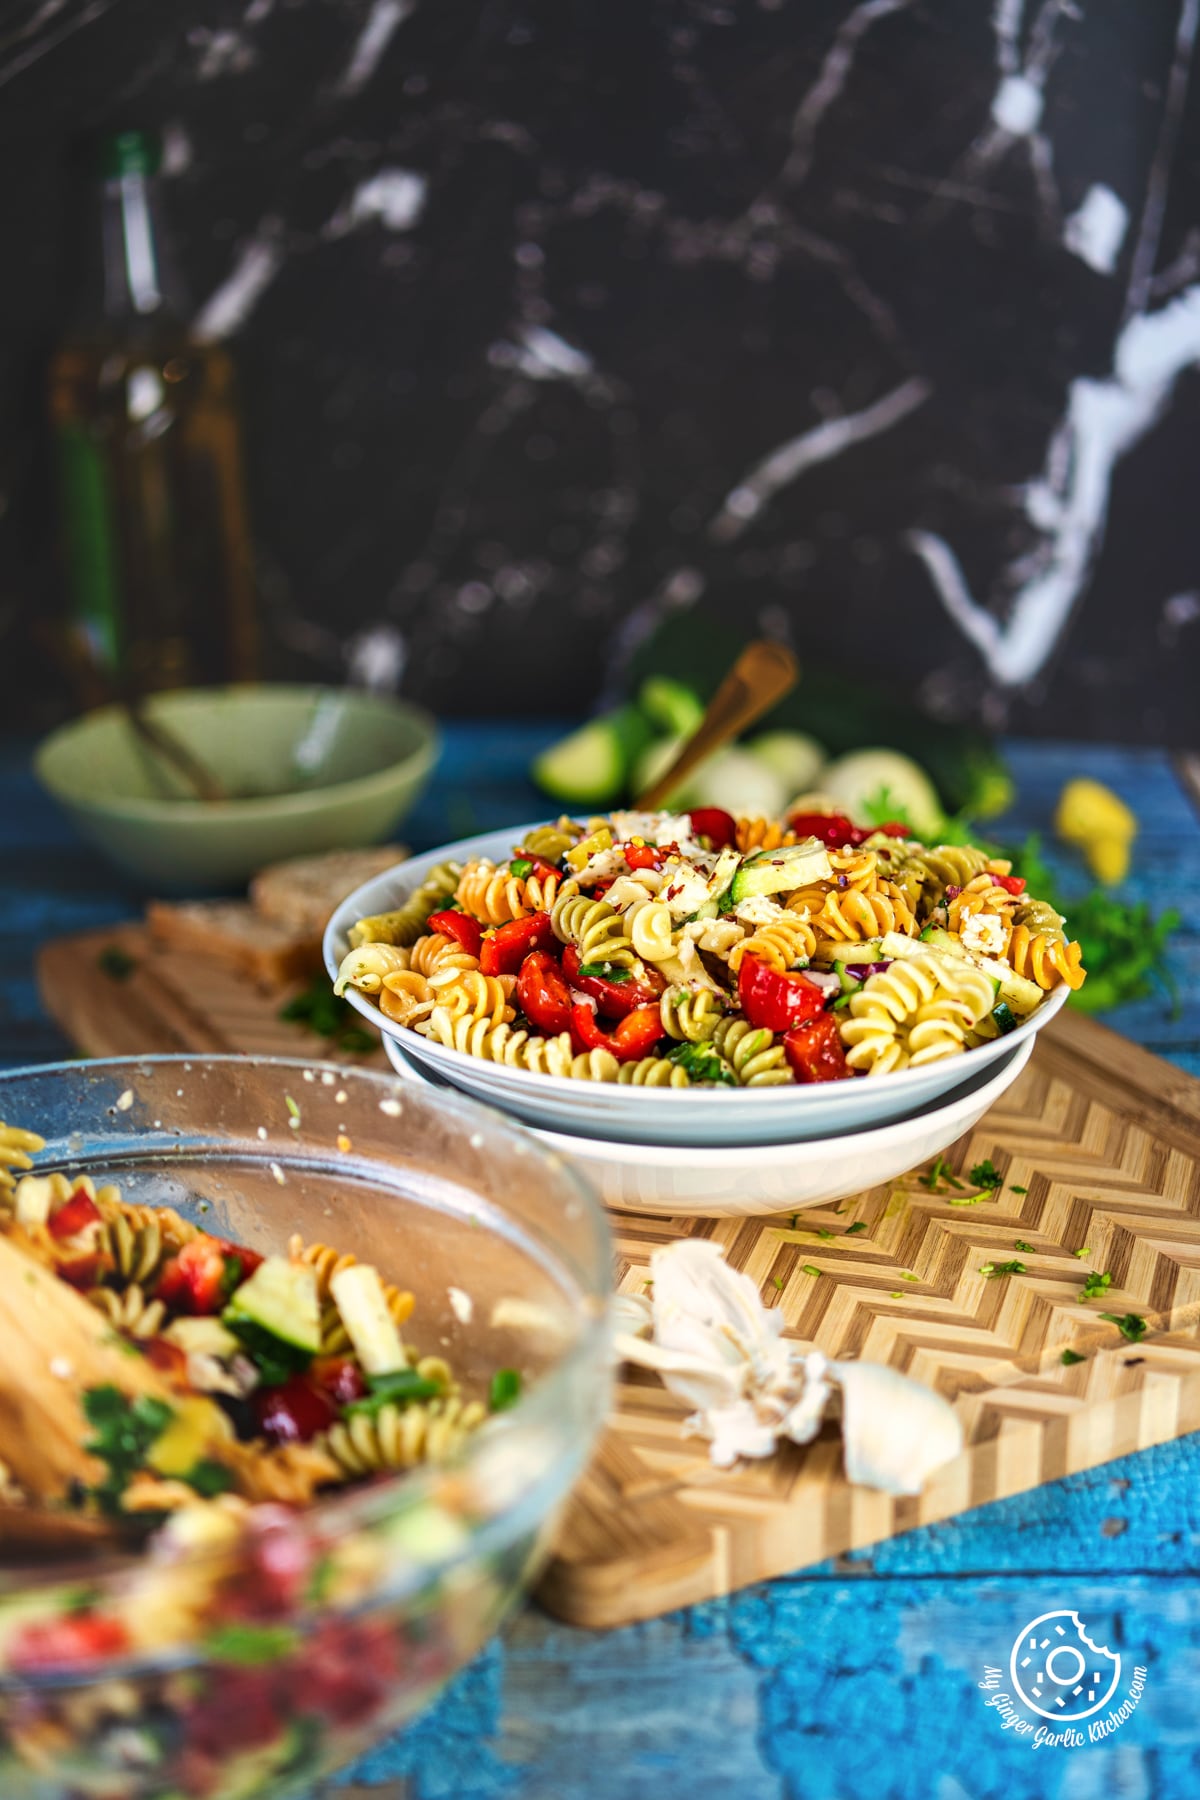 photo of a bowl of pasta salad with a wooden spoon and a bowl of vegetables